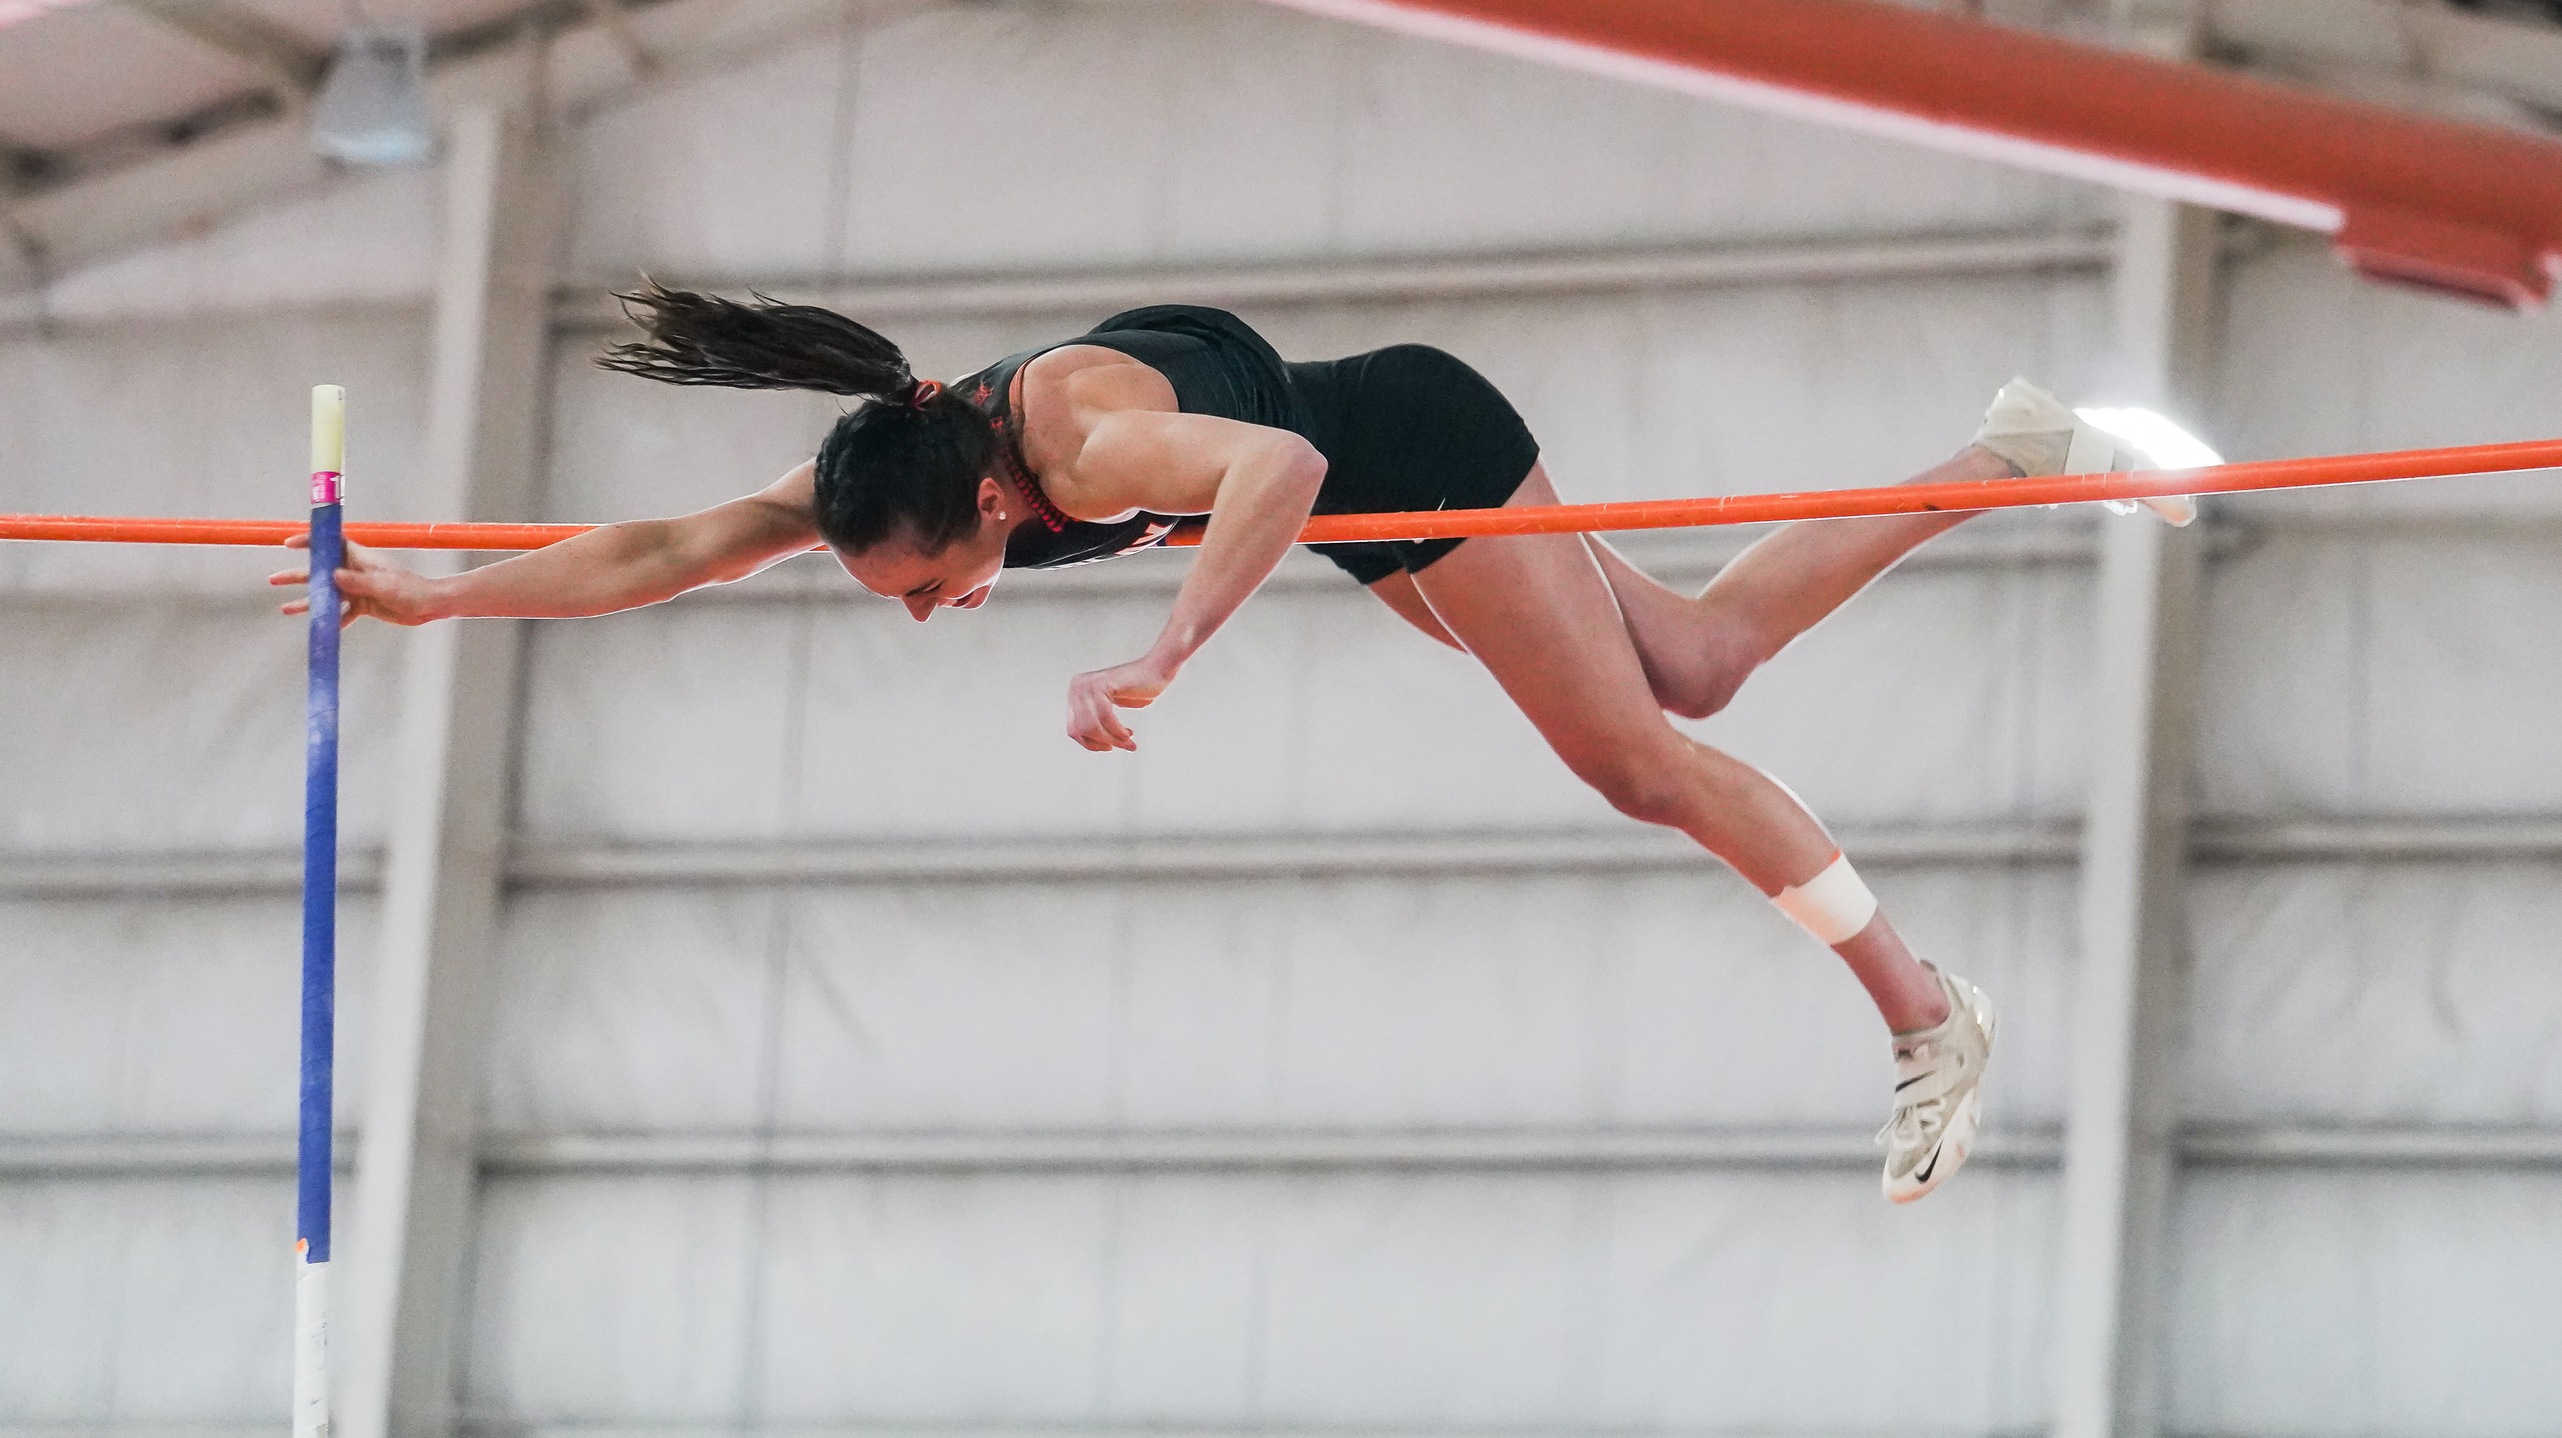 Girl in black soaring over a bar in sport of pole vault